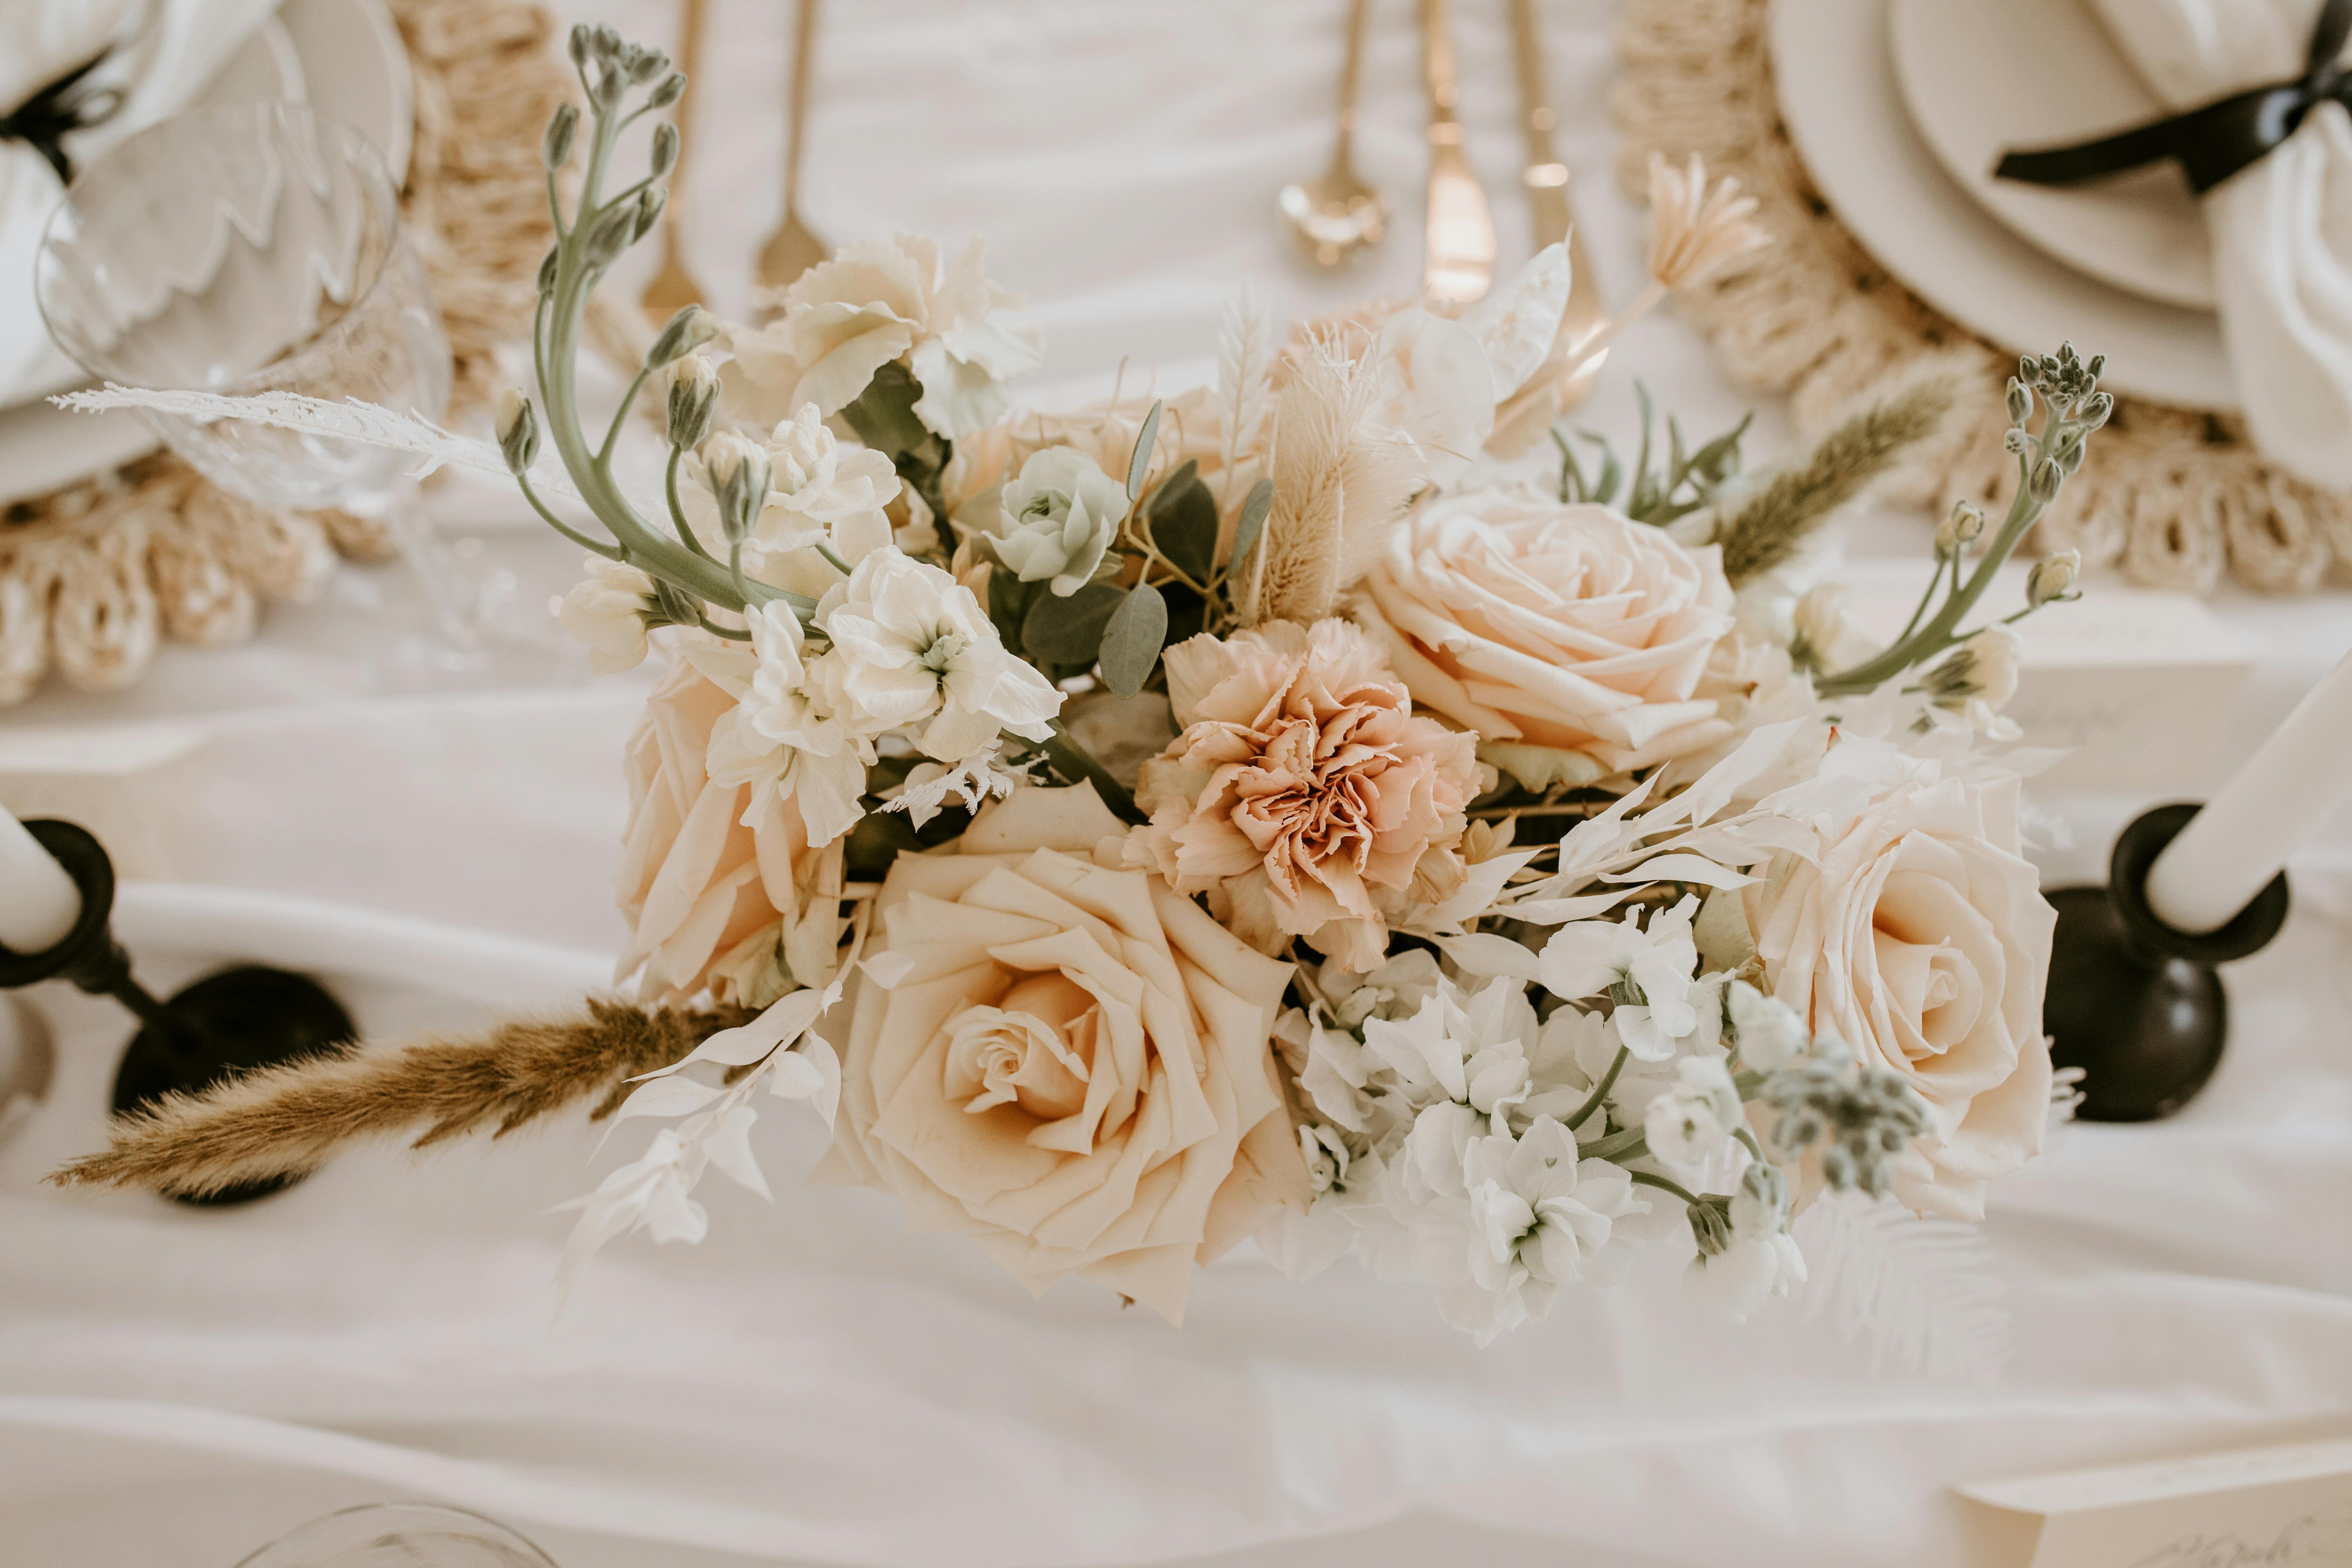 elegant flowers placed on table near candles